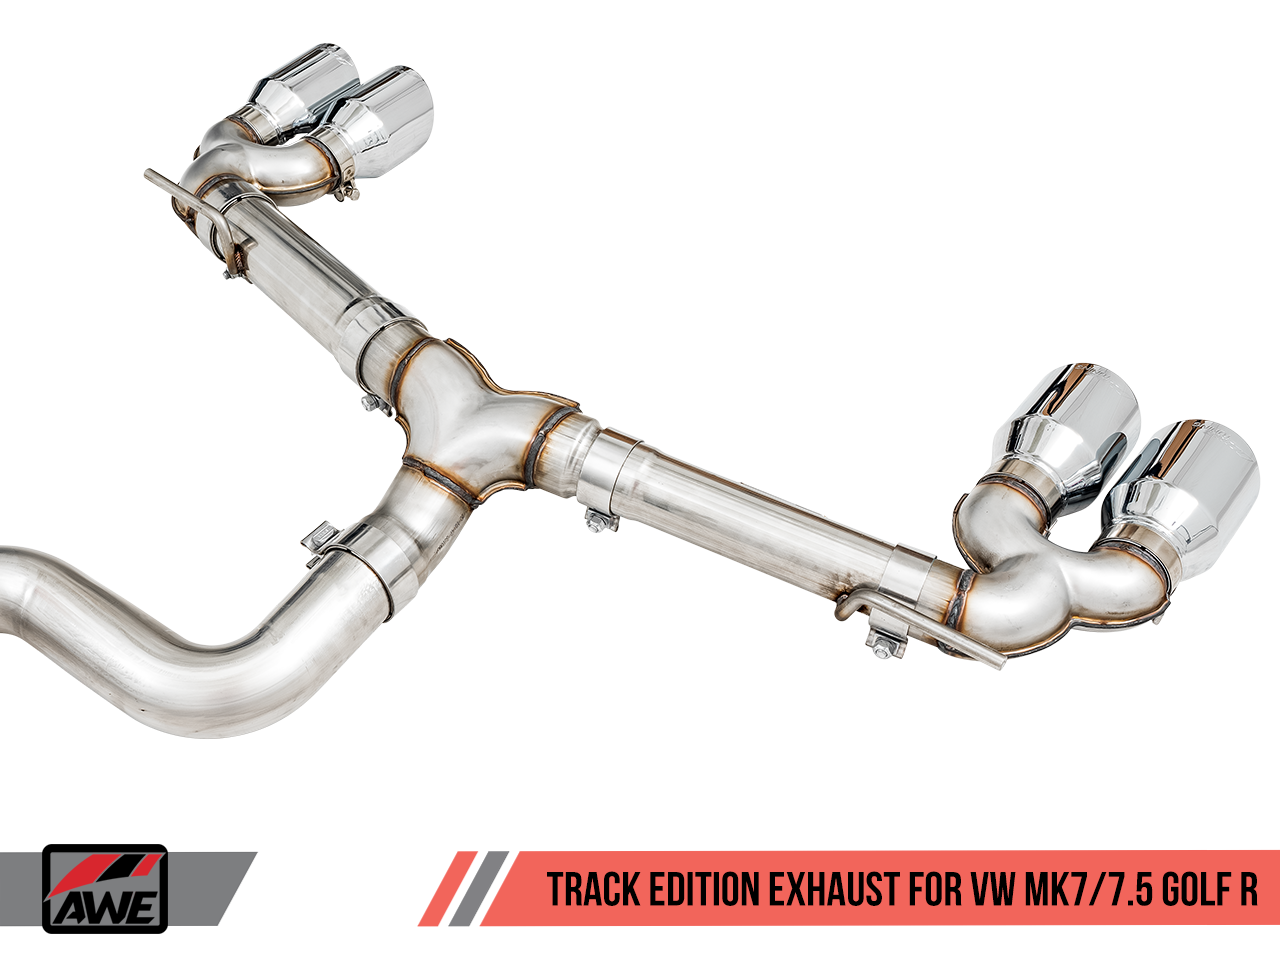 AWE Track Edition Exhaust for MK7 Golf R